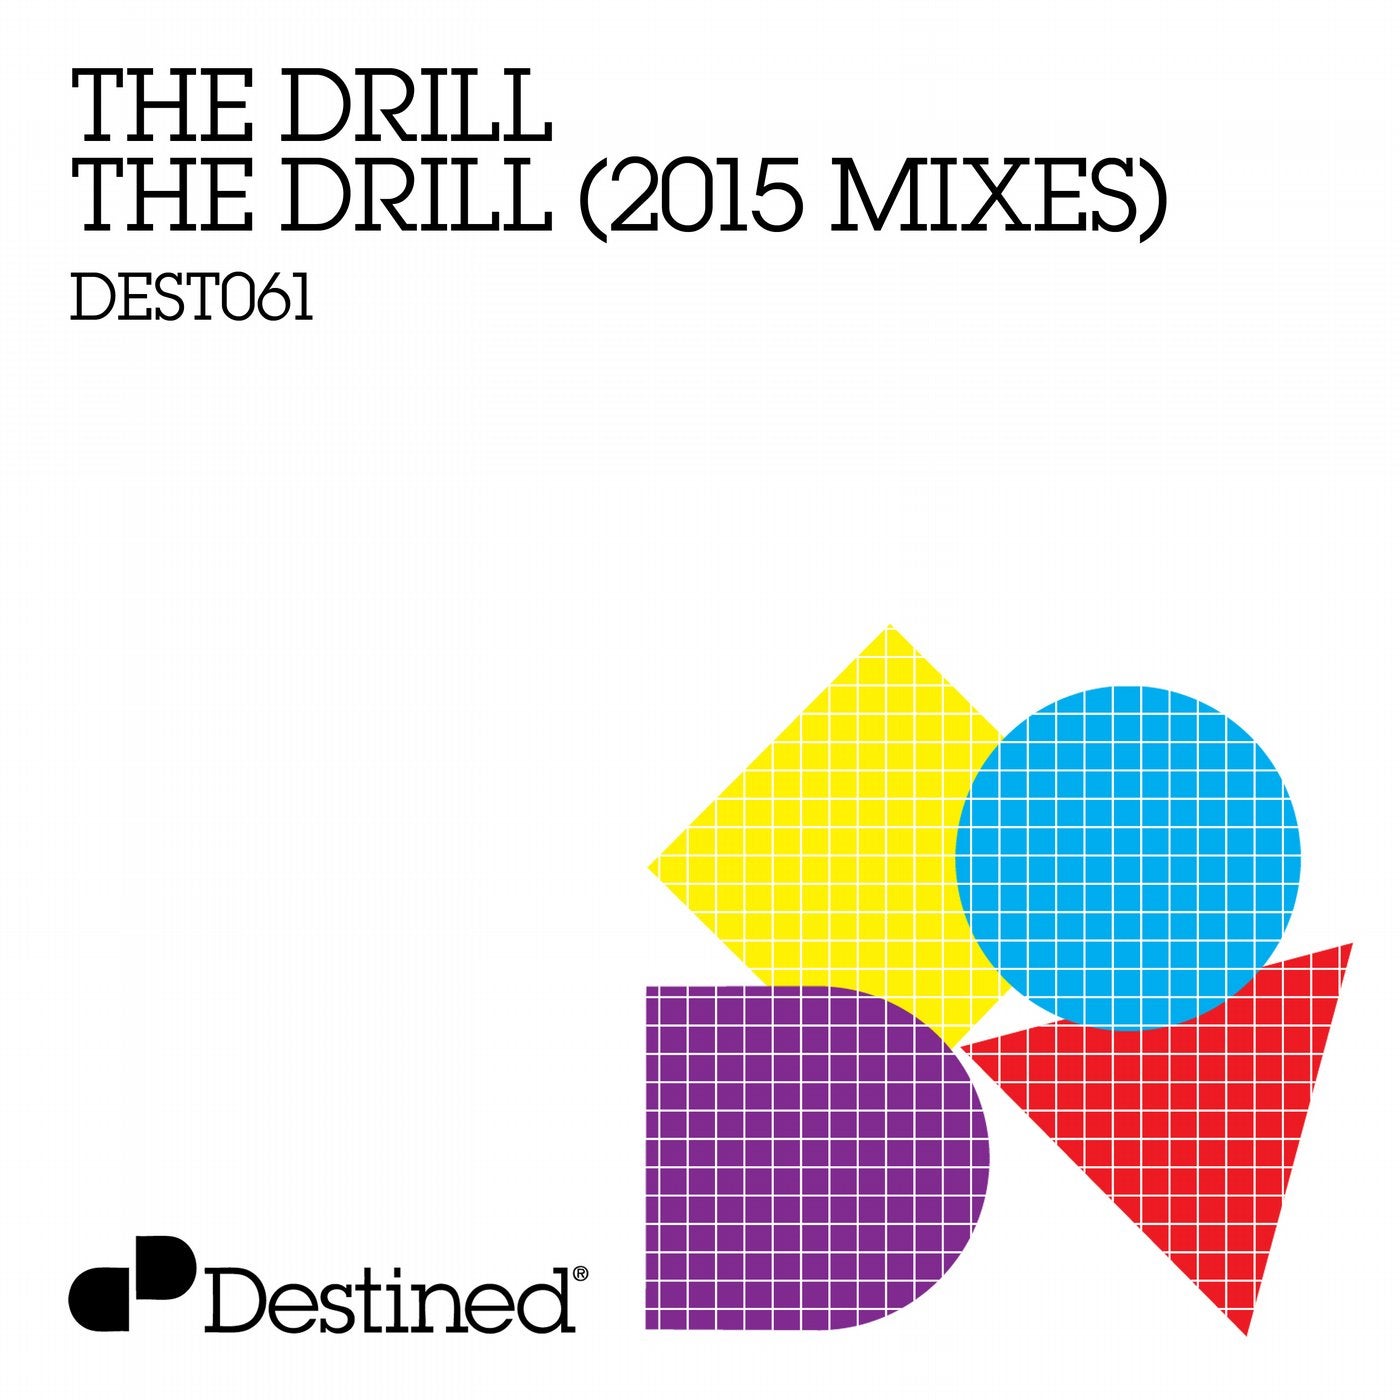 The Drill (2015 Mixes)